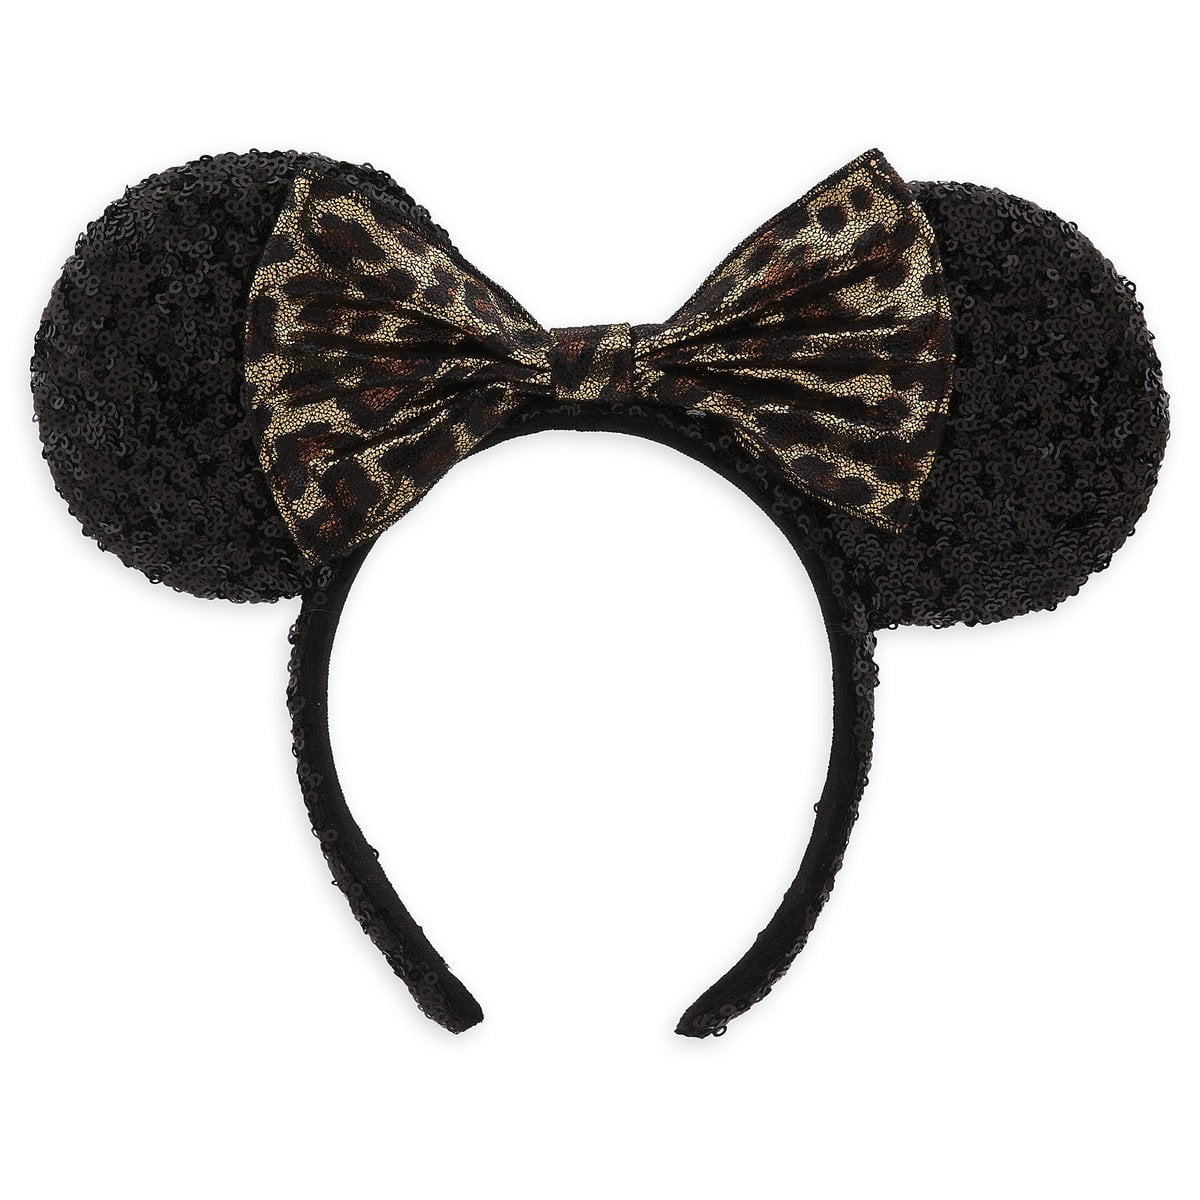 New Disney Parks MINNIE MOUSE Cheetah Print Faux Fur Hat with Ears 